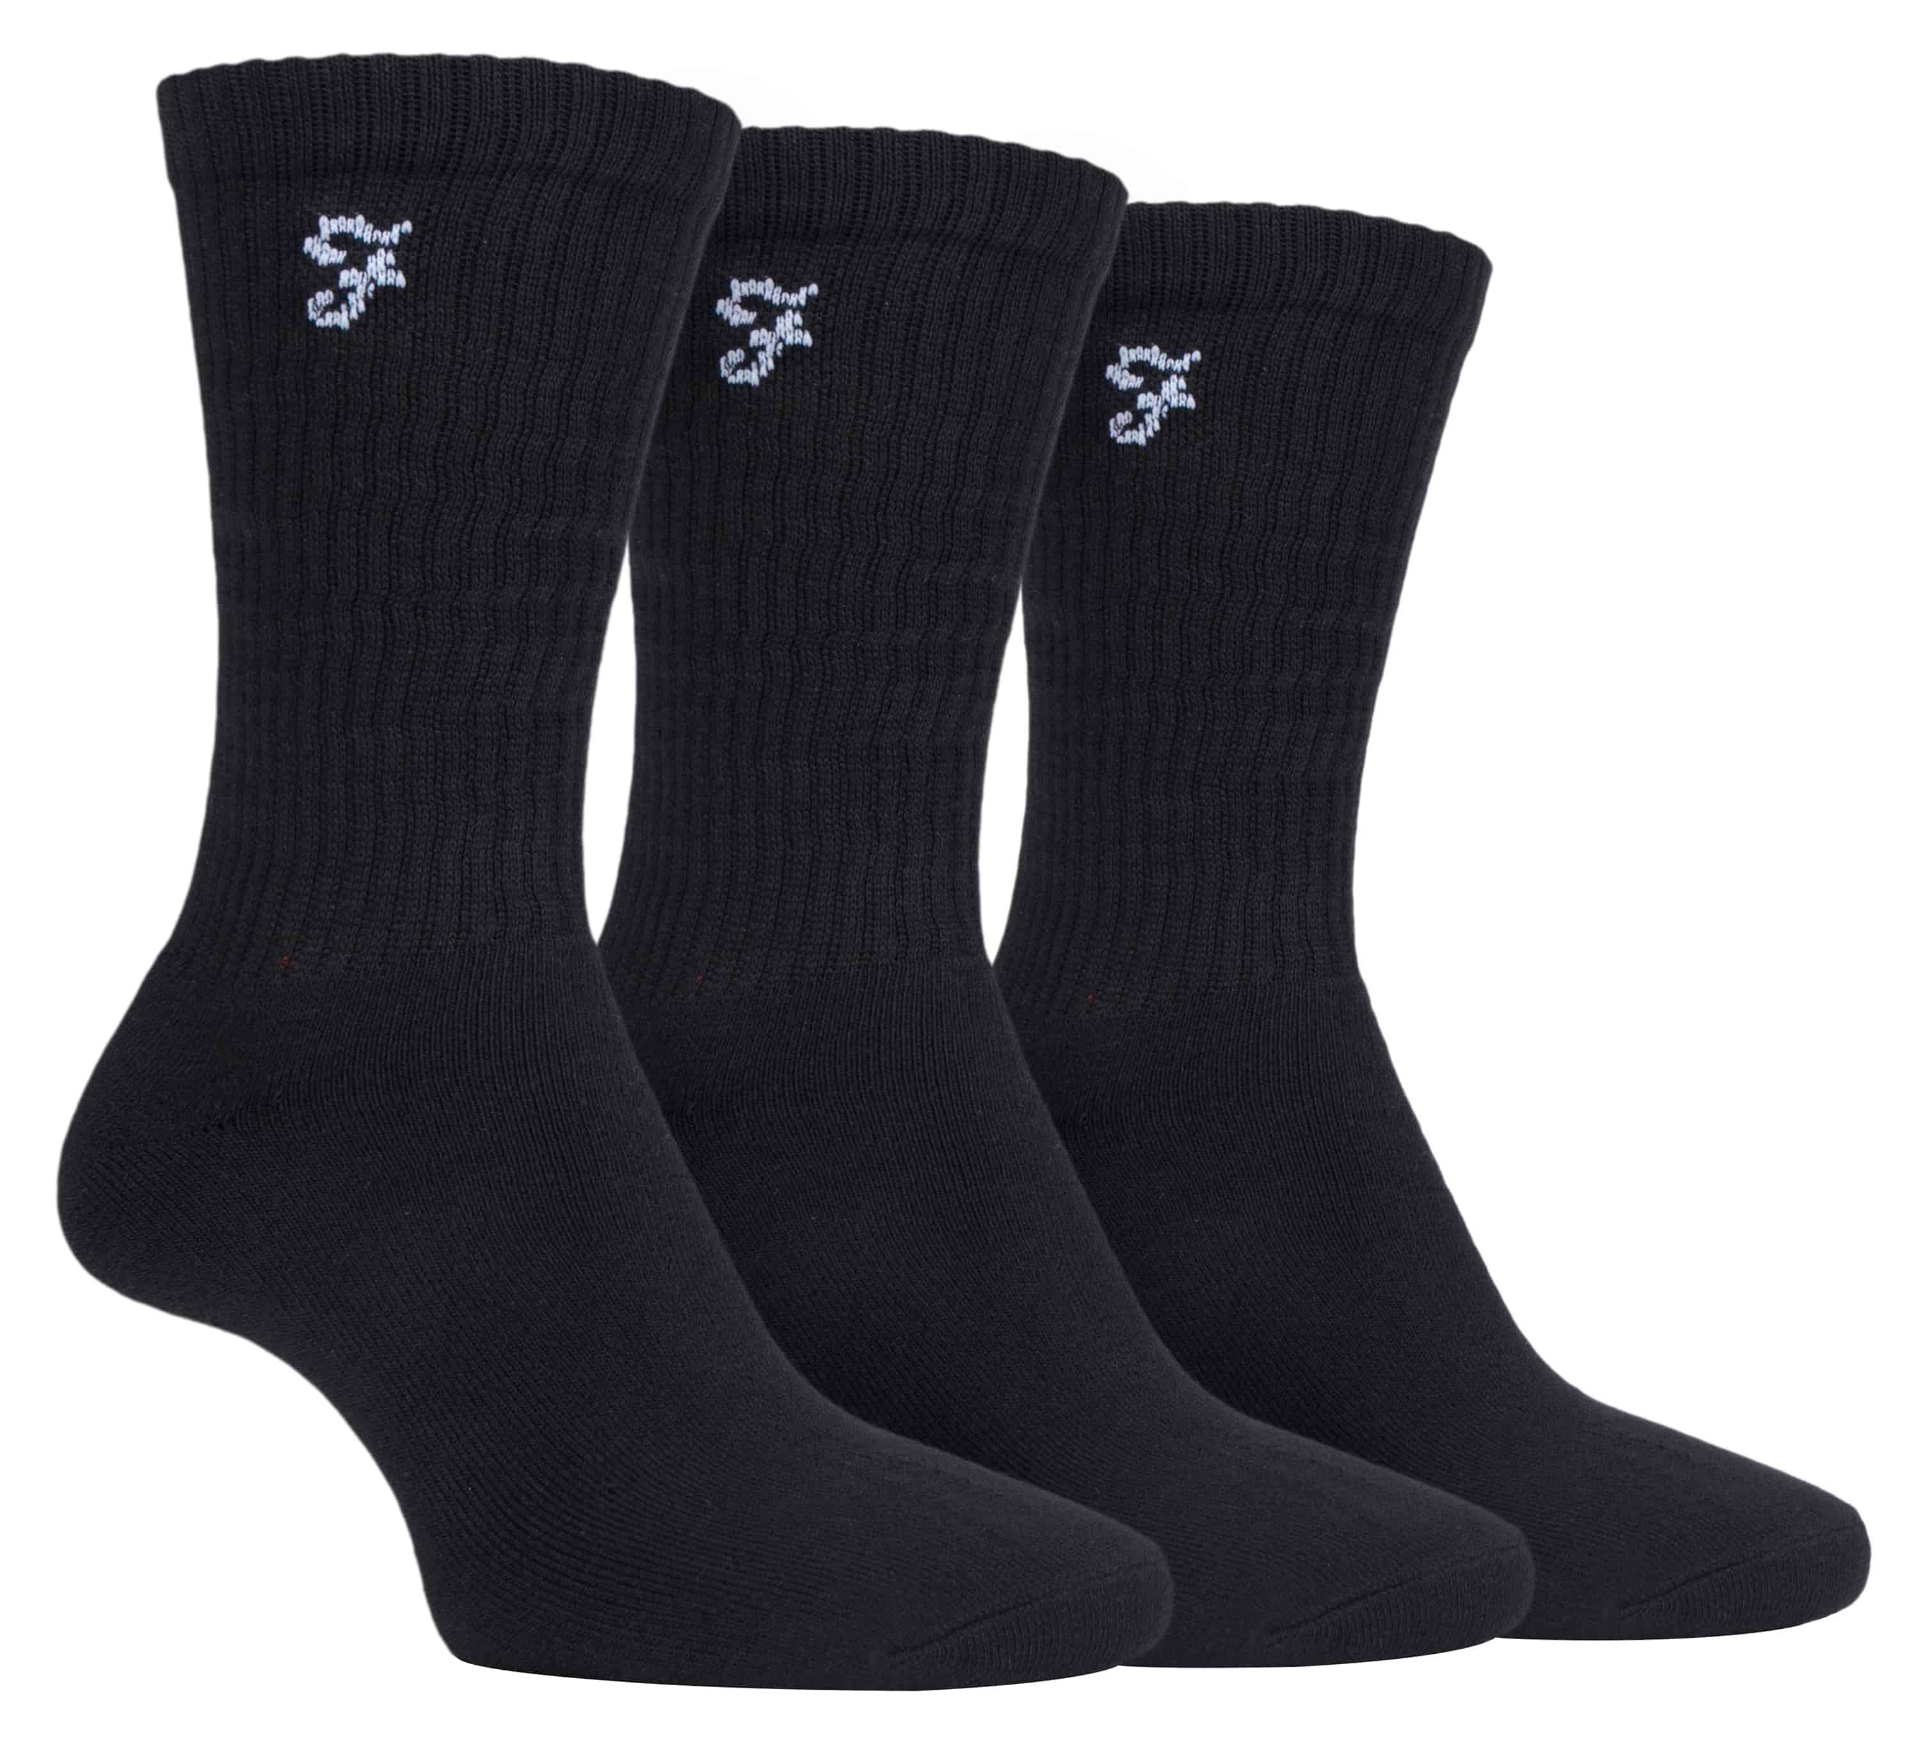 3 Pairs Mens Cushioned Sole Athletic Sports Socks